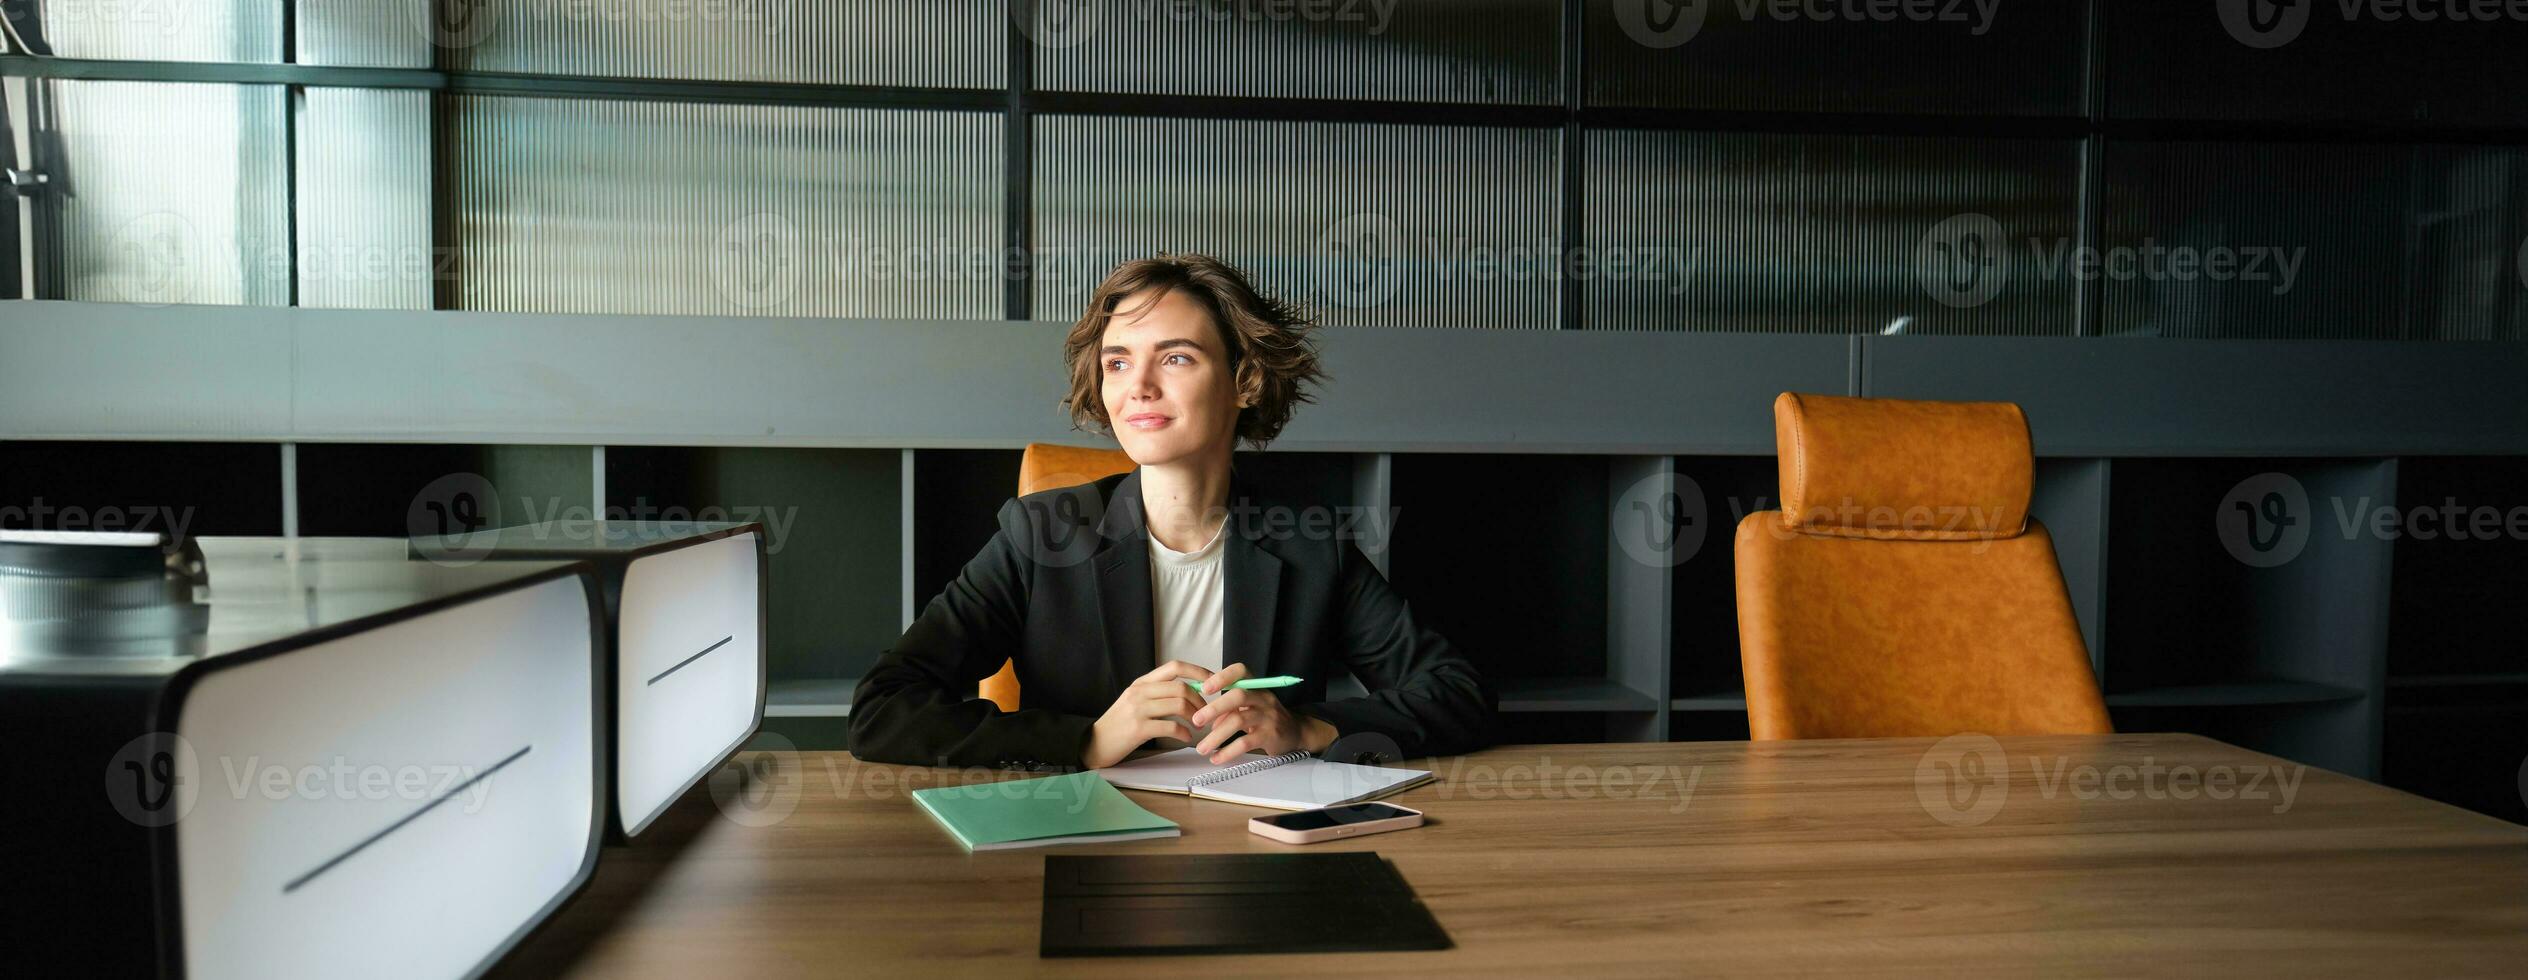 Young businesswoman waiting for start of meeting. Corporate woman in suit sitting in office, working on documents, waiting for client photo